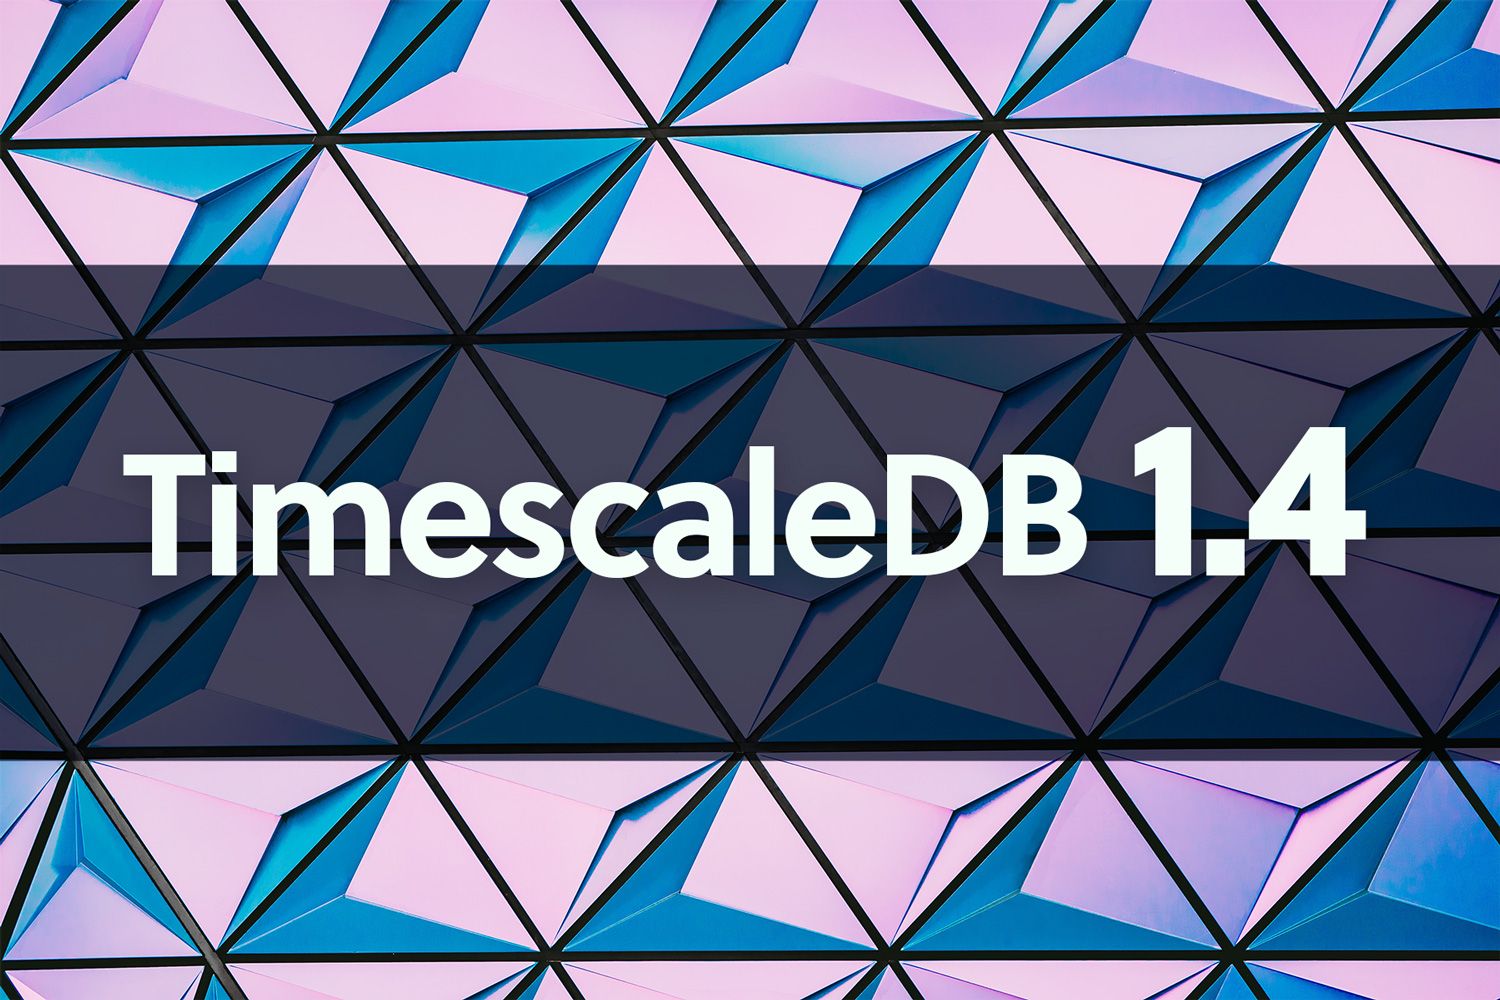 TimescaleDB 1.4 introduces better performance for time-series analytics